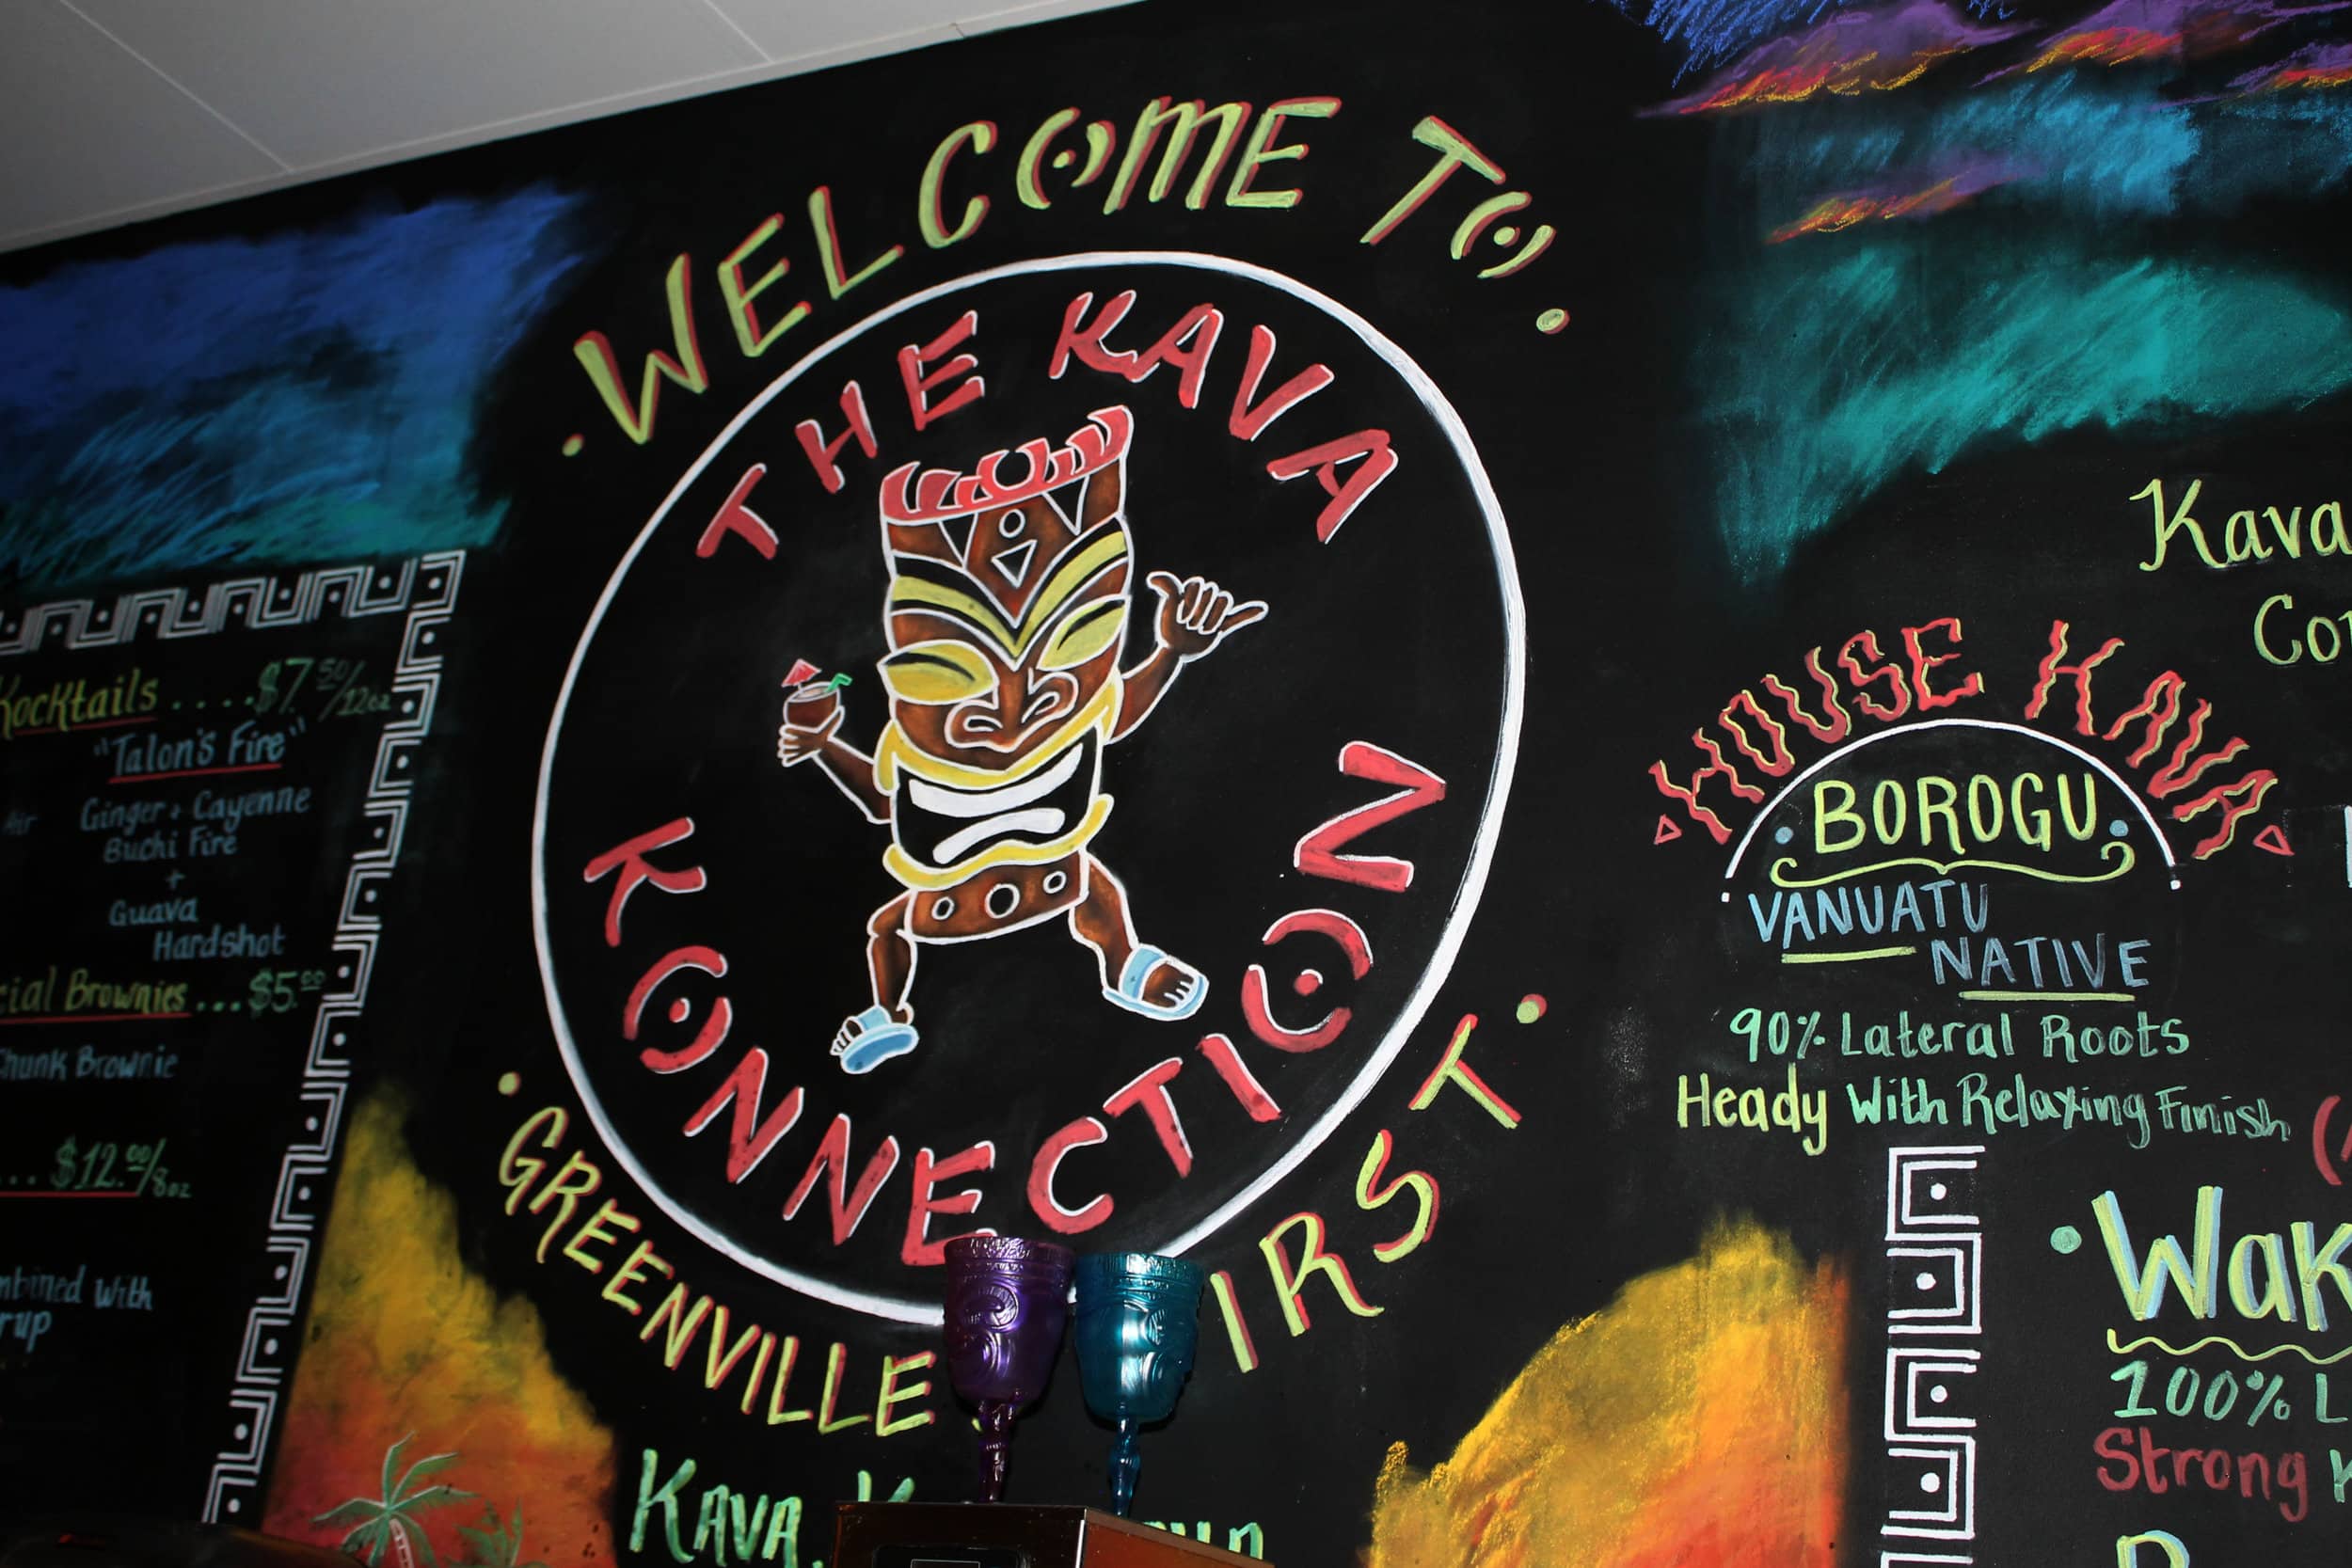 The Kava Konnection, South Carolinas only Kava Bar is open until midnight on Tuesday through Thursday and till 12 a.m. and  2 a.m. on Fridays and Saturdays. Students from North Greenville University travel to Kava for their favorite drinks.